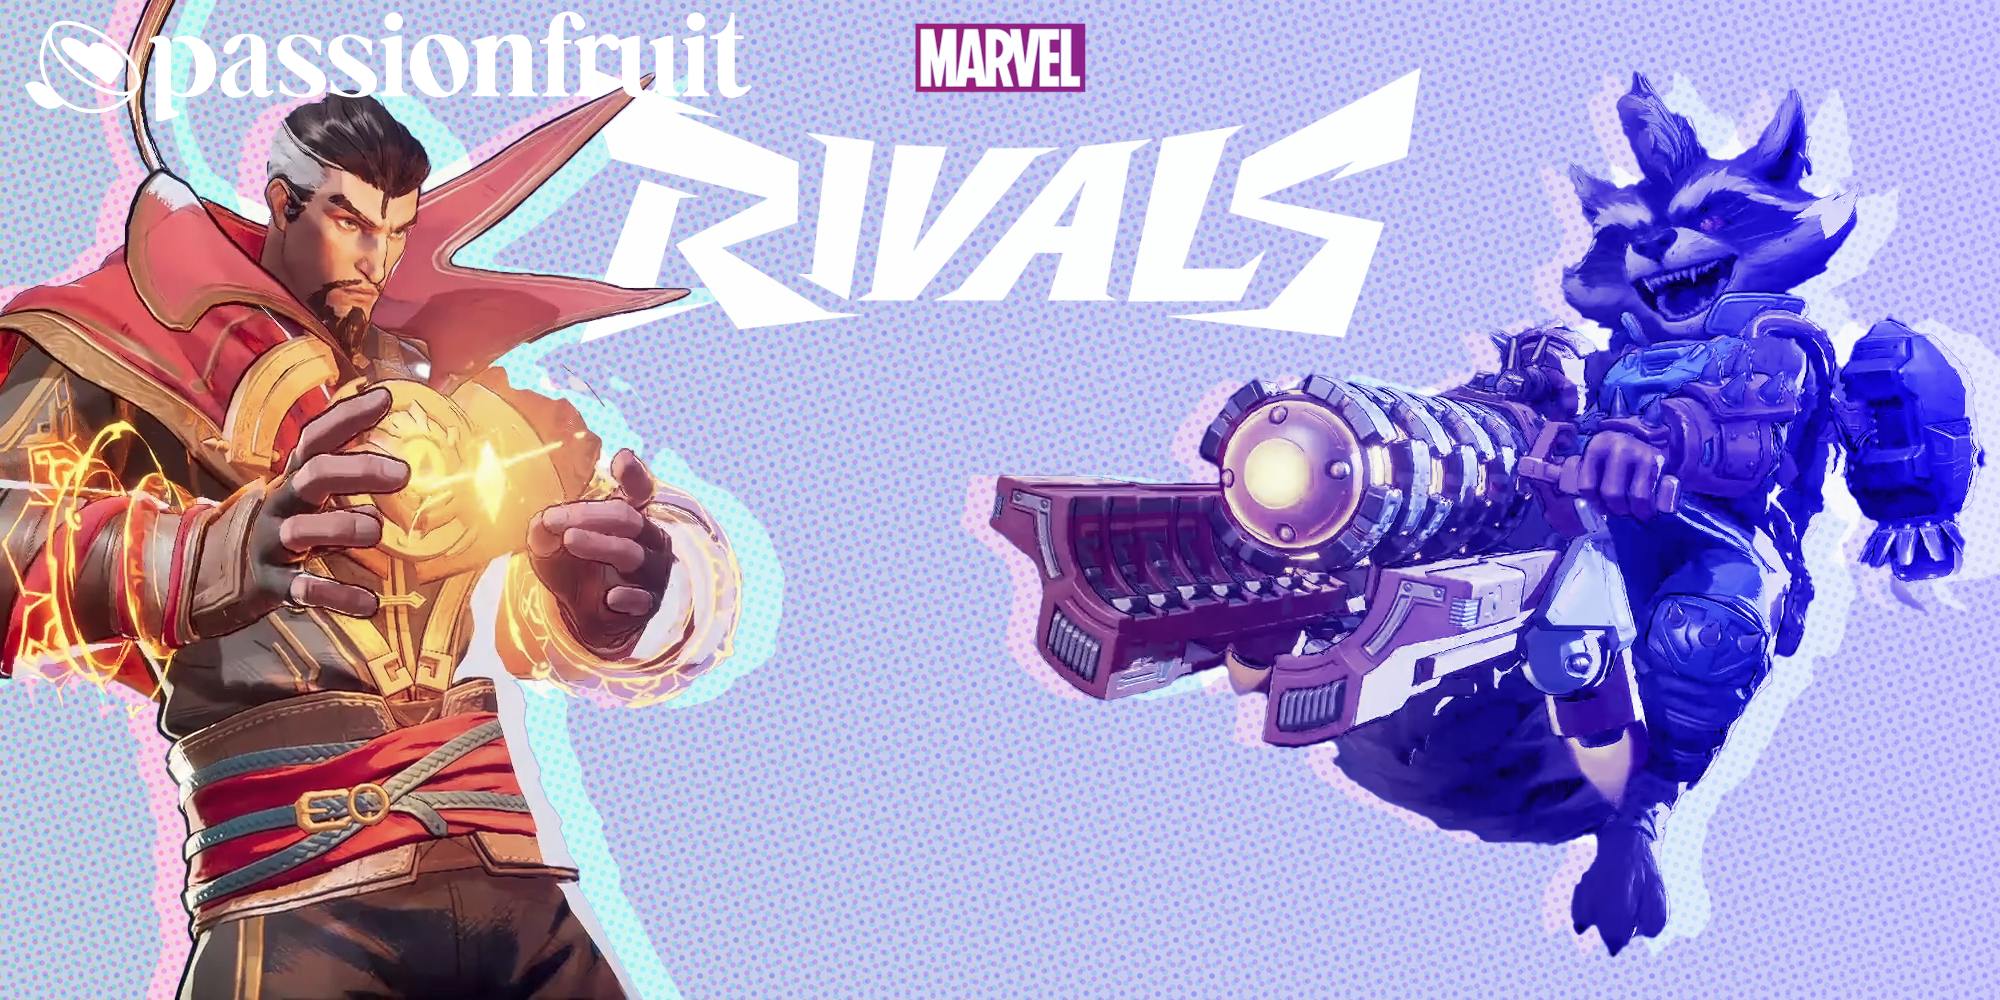 marvel rivals video game characters next to passionfruit logo